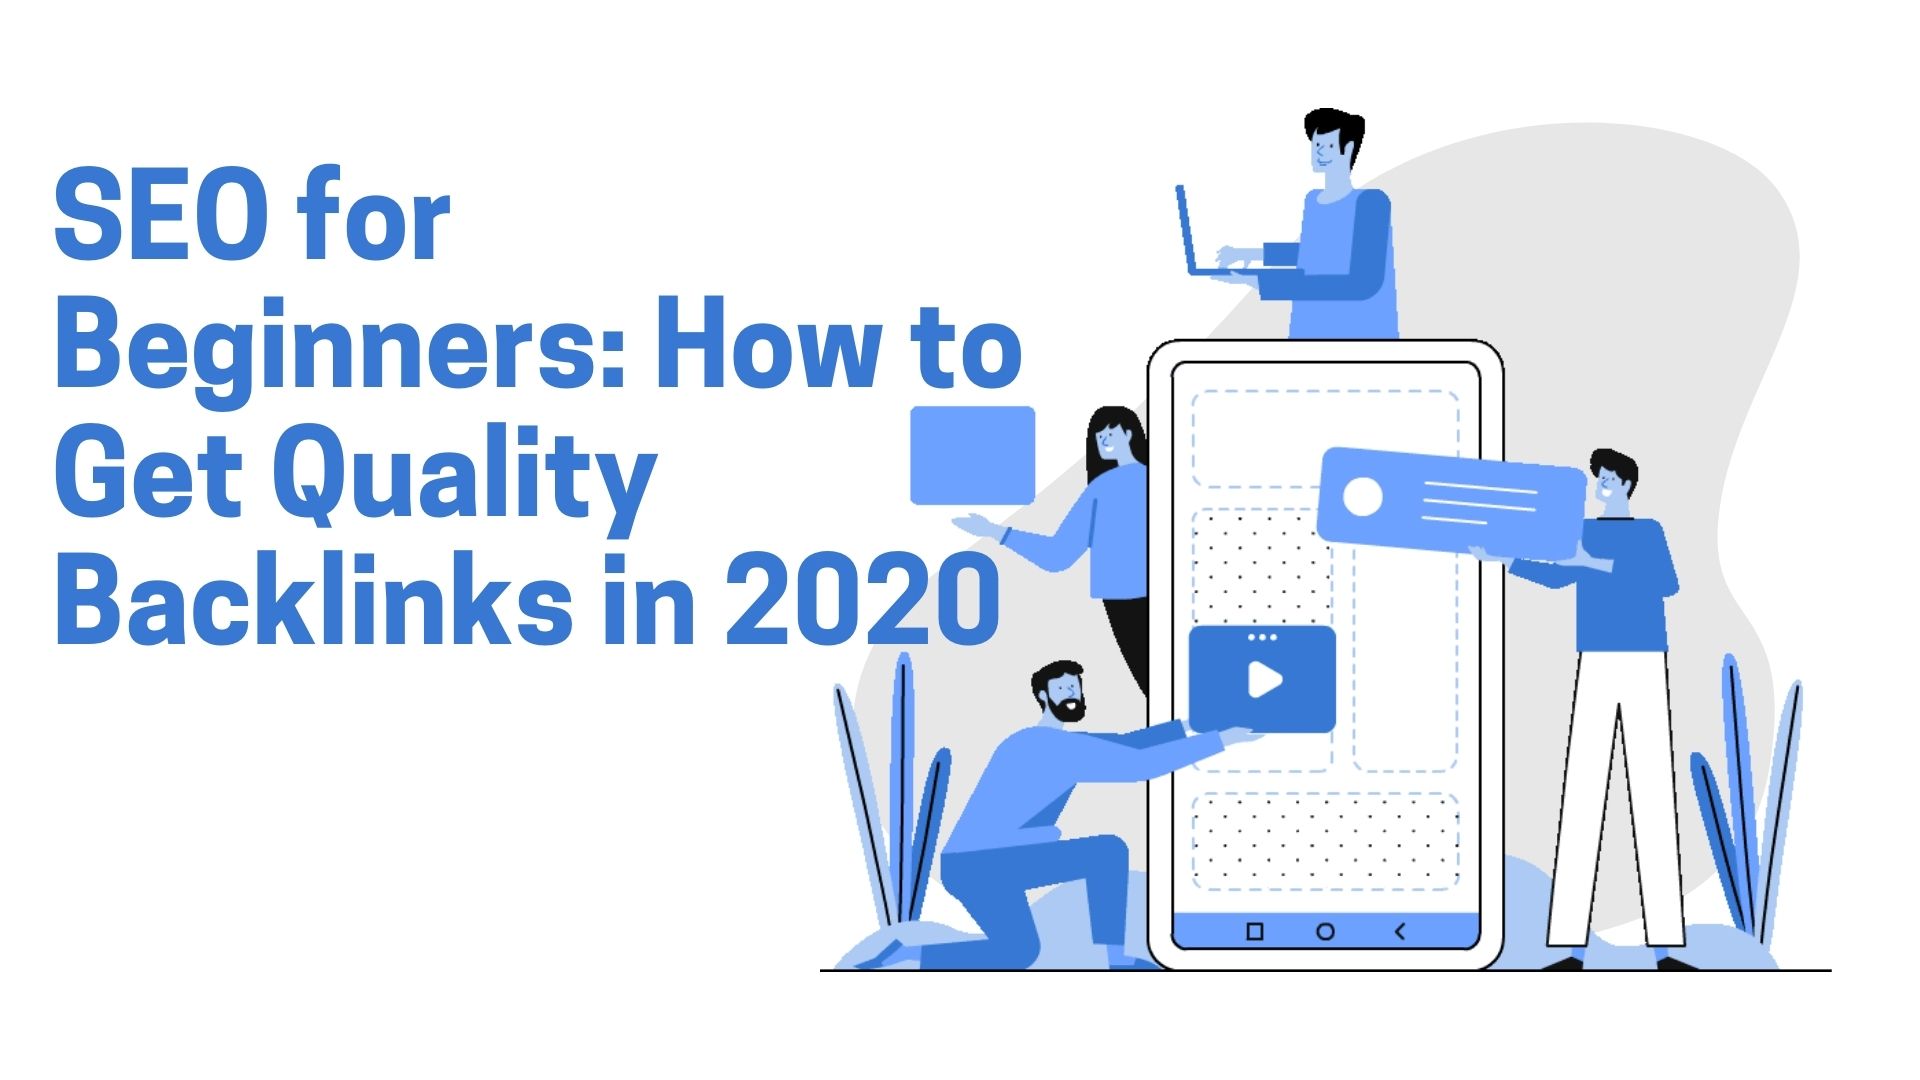 SEO for Beginners: How to Get Quality Backlinks in 2020